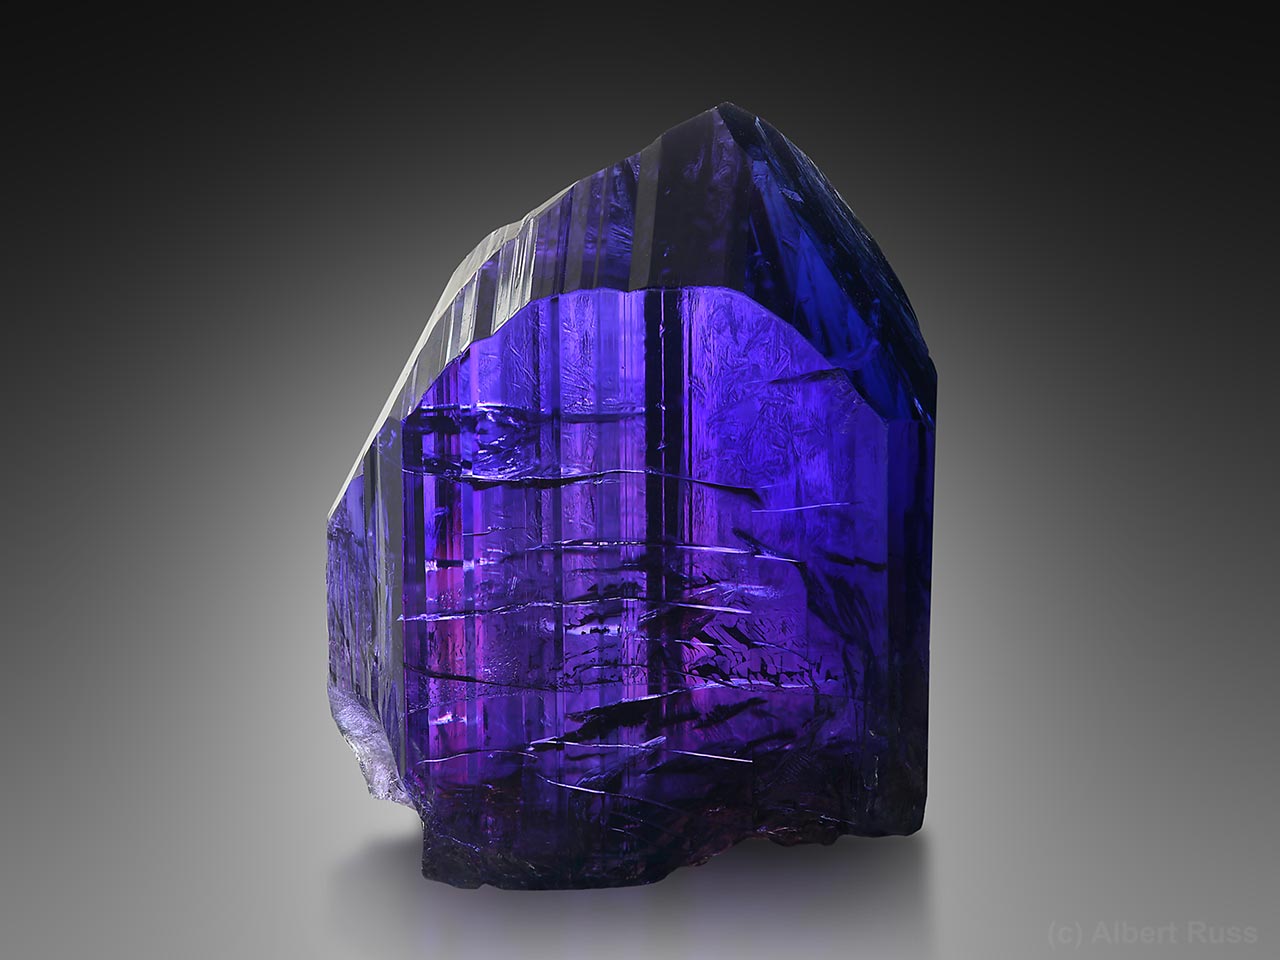 Crystal of deep blue gemmy tanzanite (variety of zoisite) from Merelani Hills, Tanzania